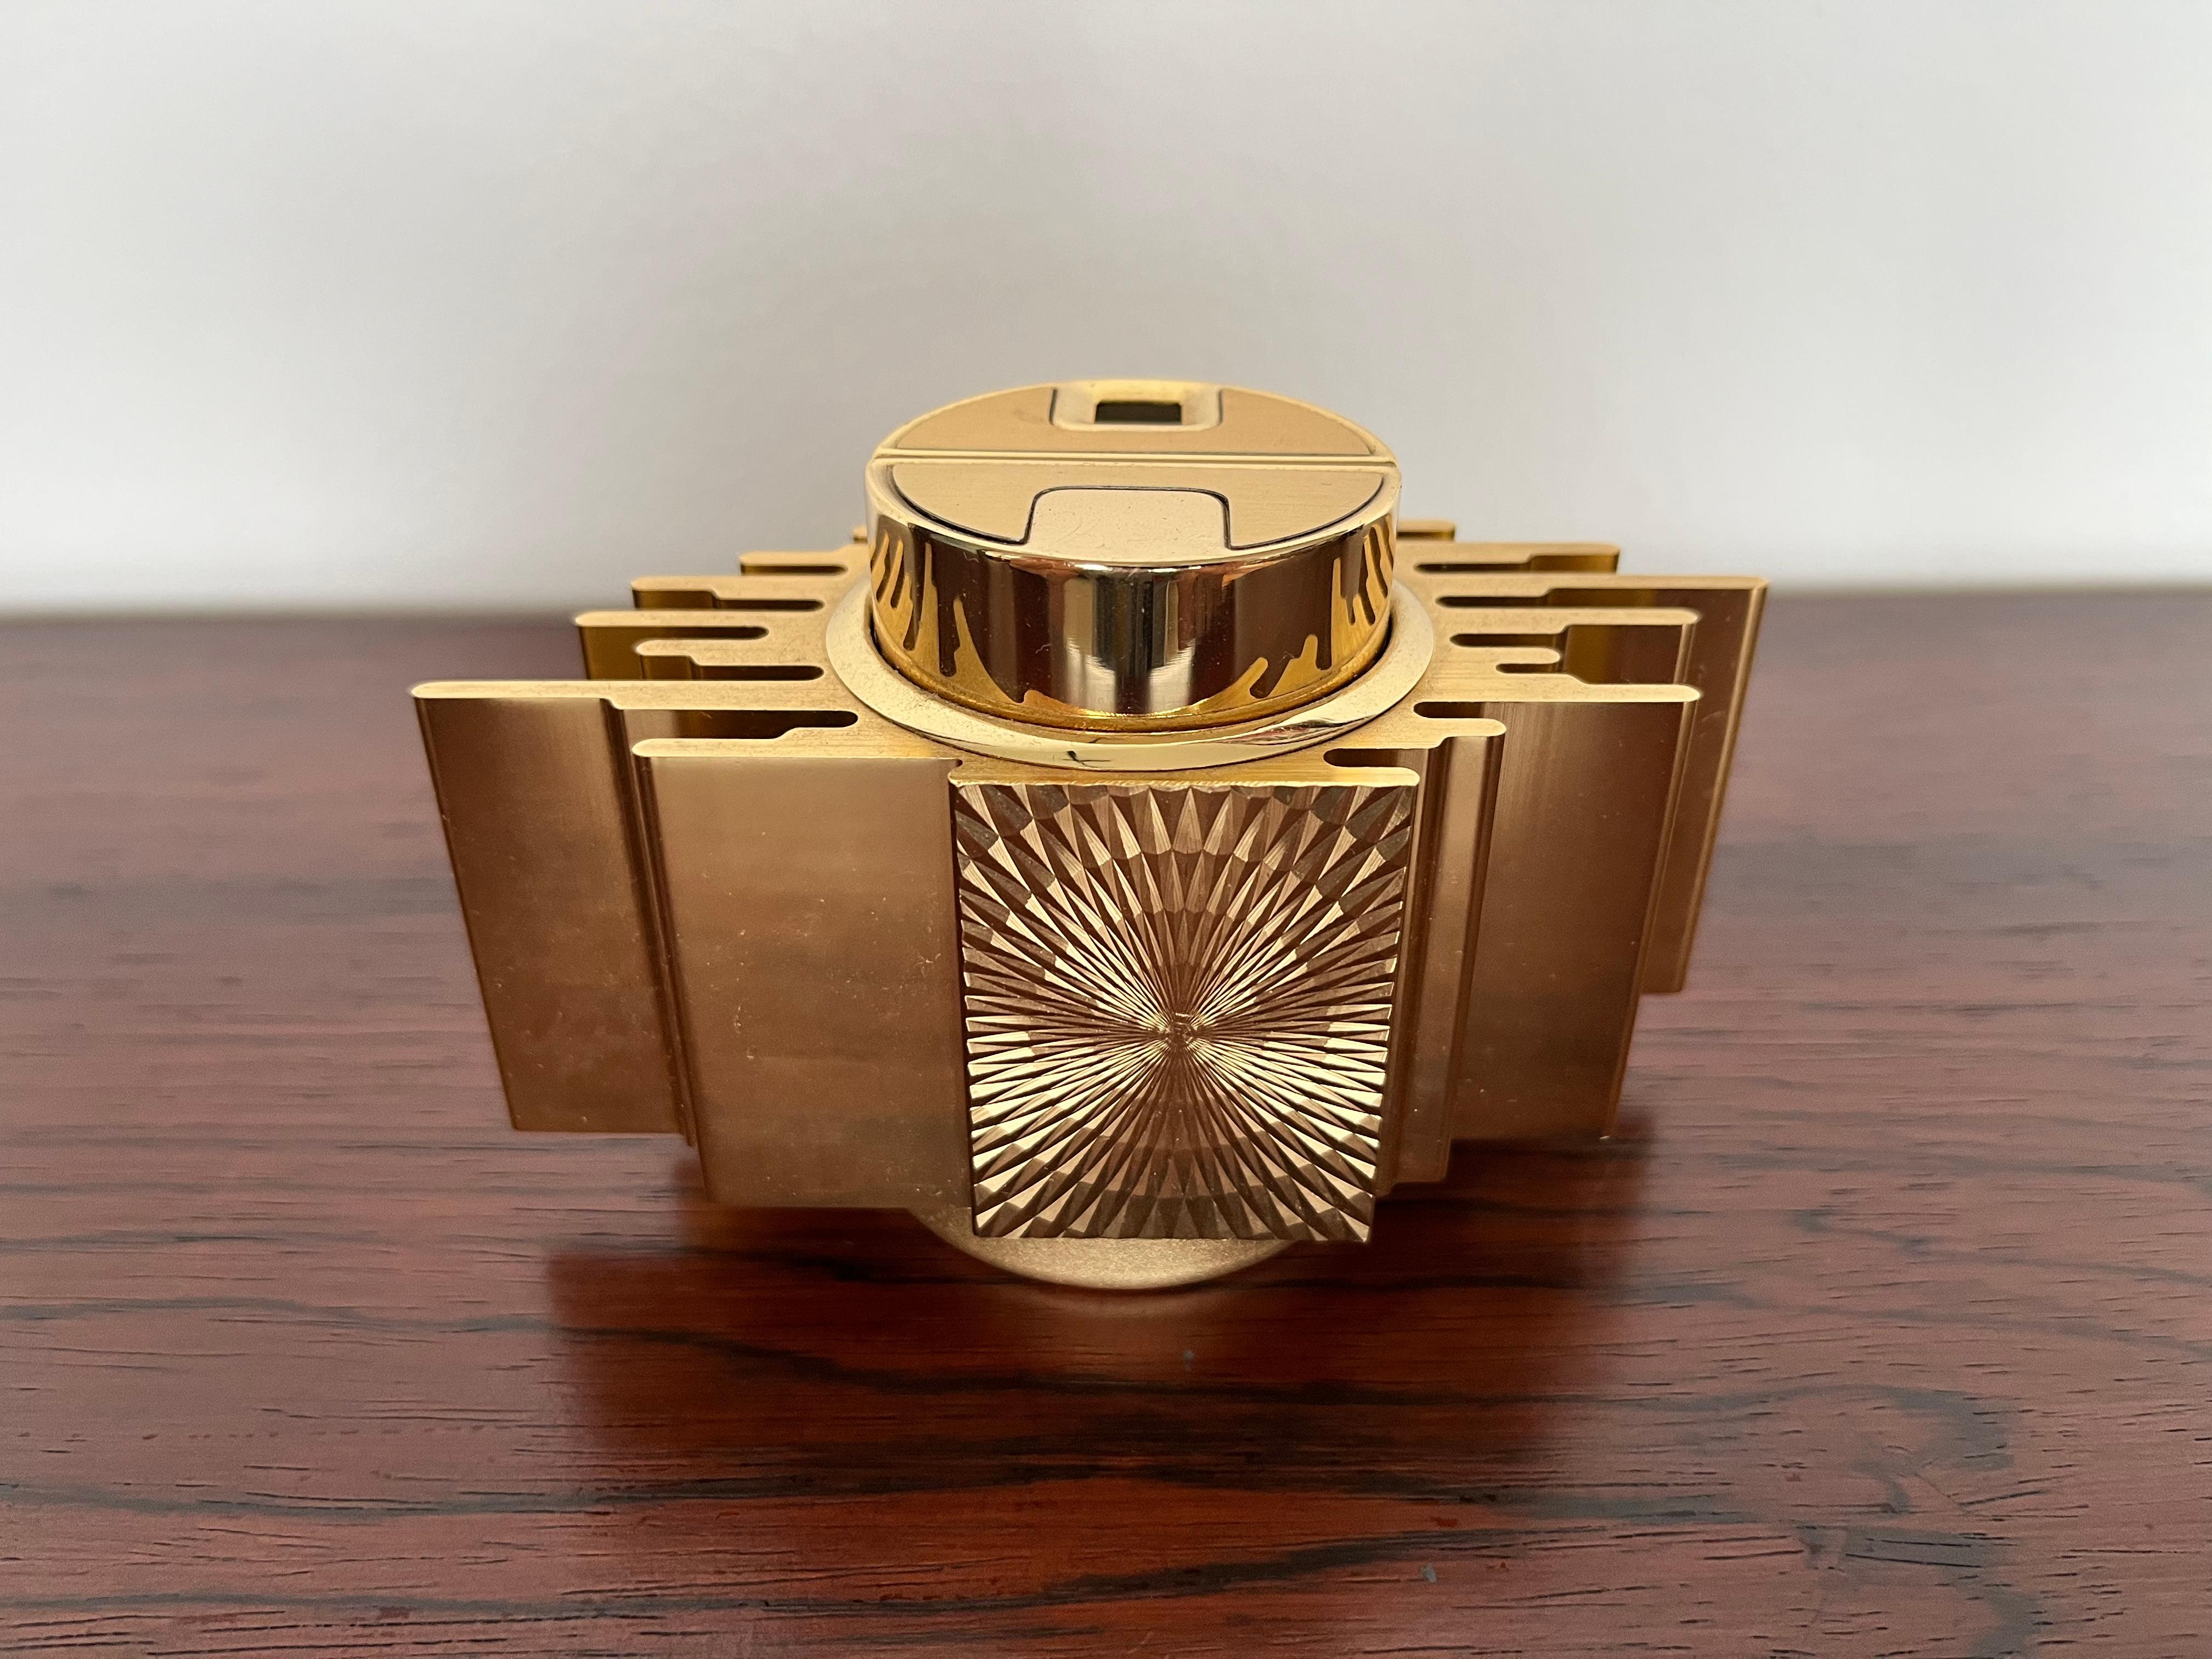 A 20th century table lighter manufactured by Japanese Sarome circa 1960s design in Art Deco style gold graphic shape. An interesting decorative piece for table decor. Working condition with original label.